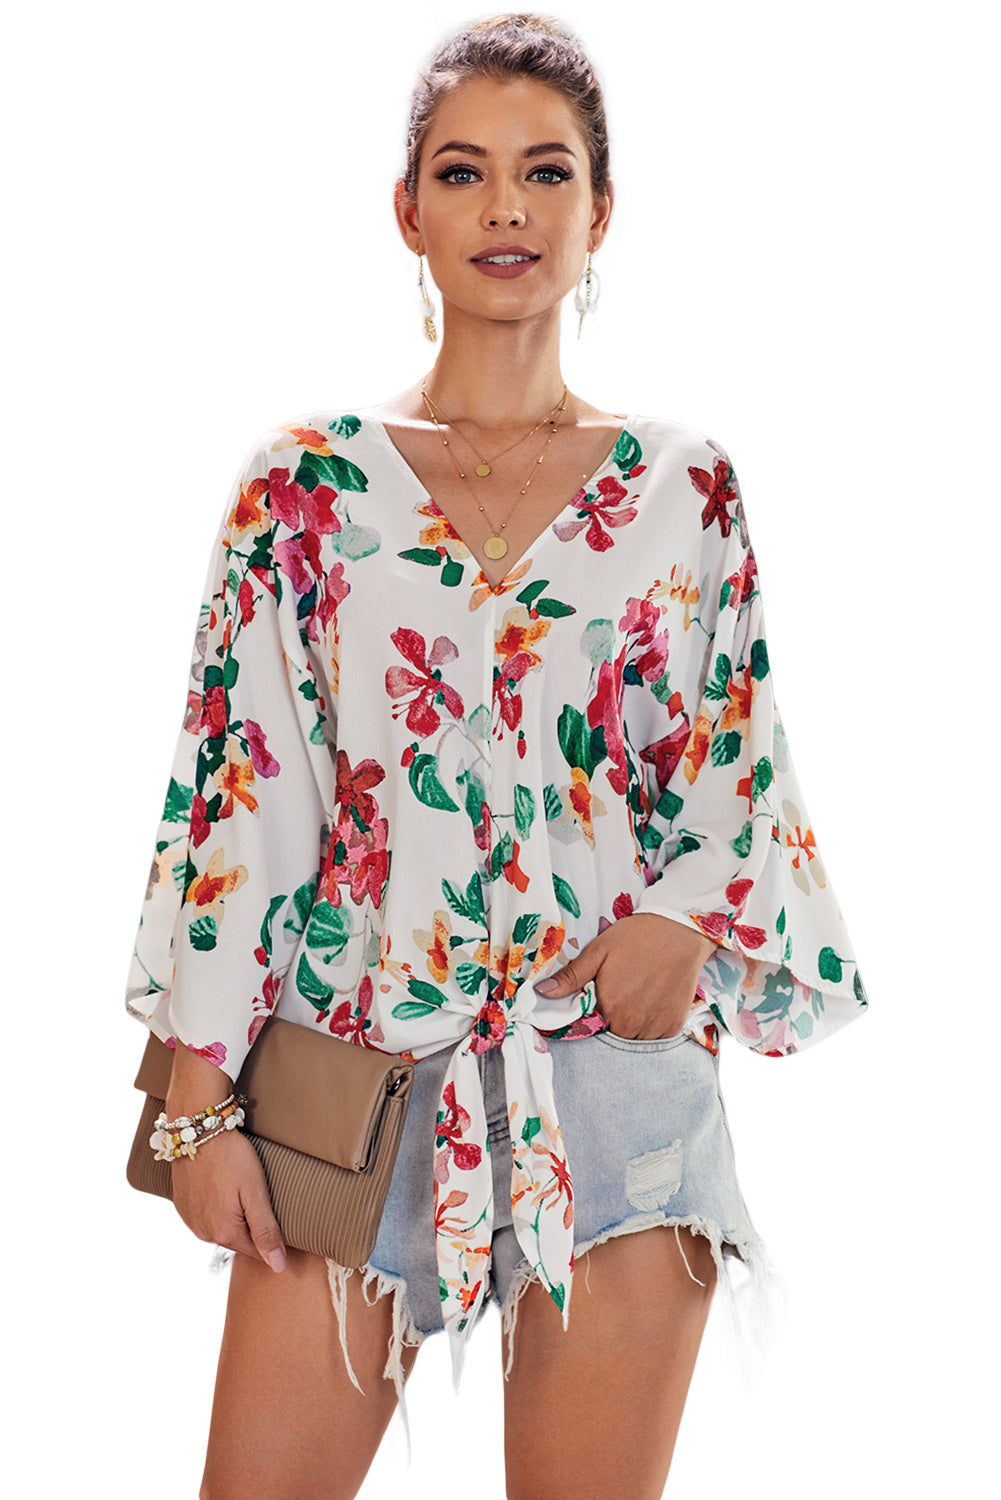 Multicolor Women's Floral Printed Deep V Neck Bats Sleeves Tie Front Blouse Loose Casual Cozy Shirt Tops For Ladies LC252336-22